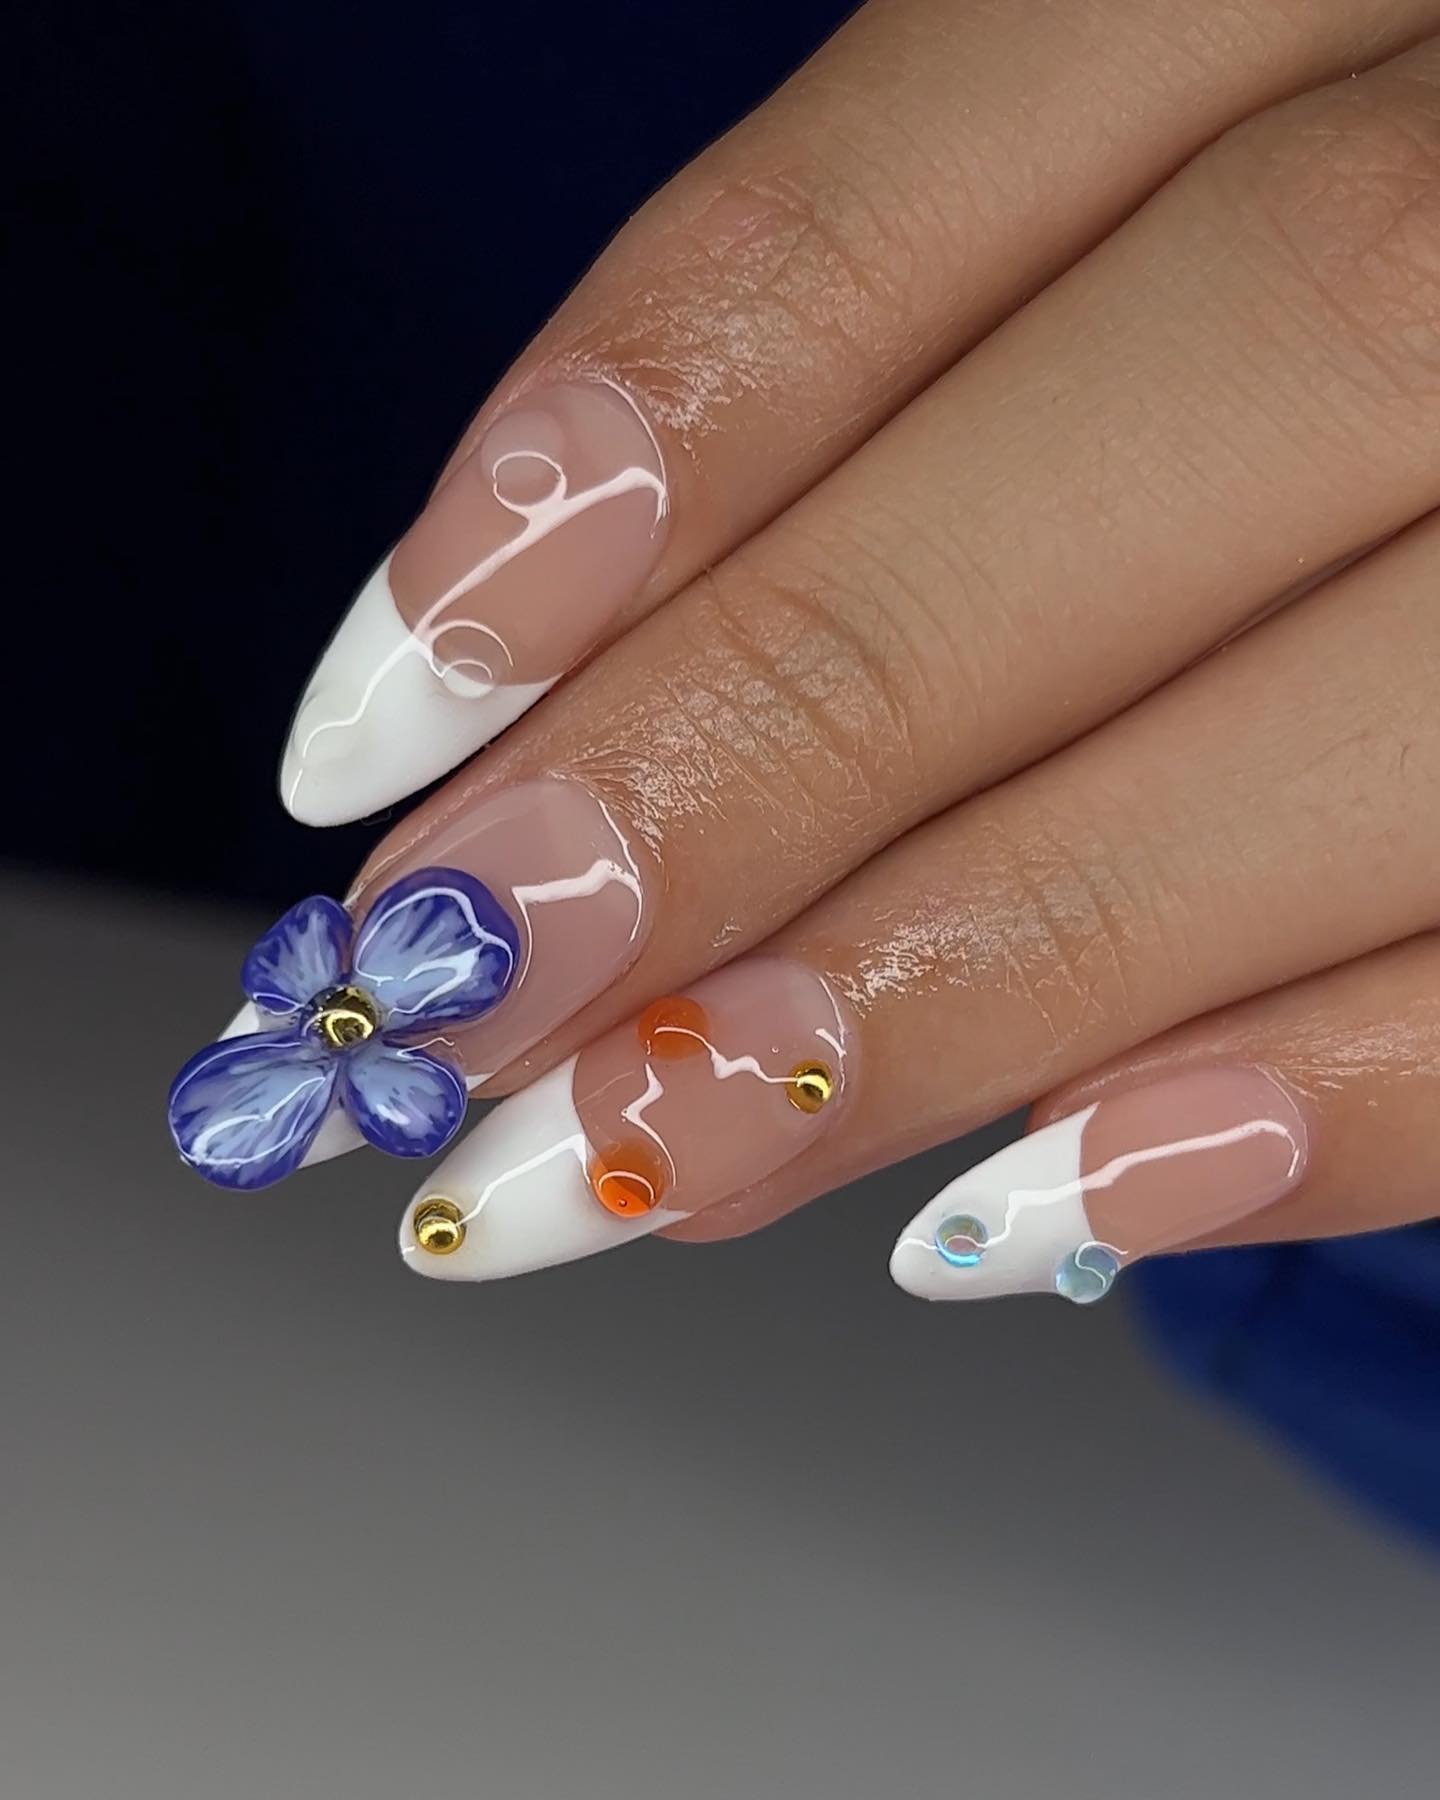 100 Of The Best Spring Inspired Nail Designs images 70